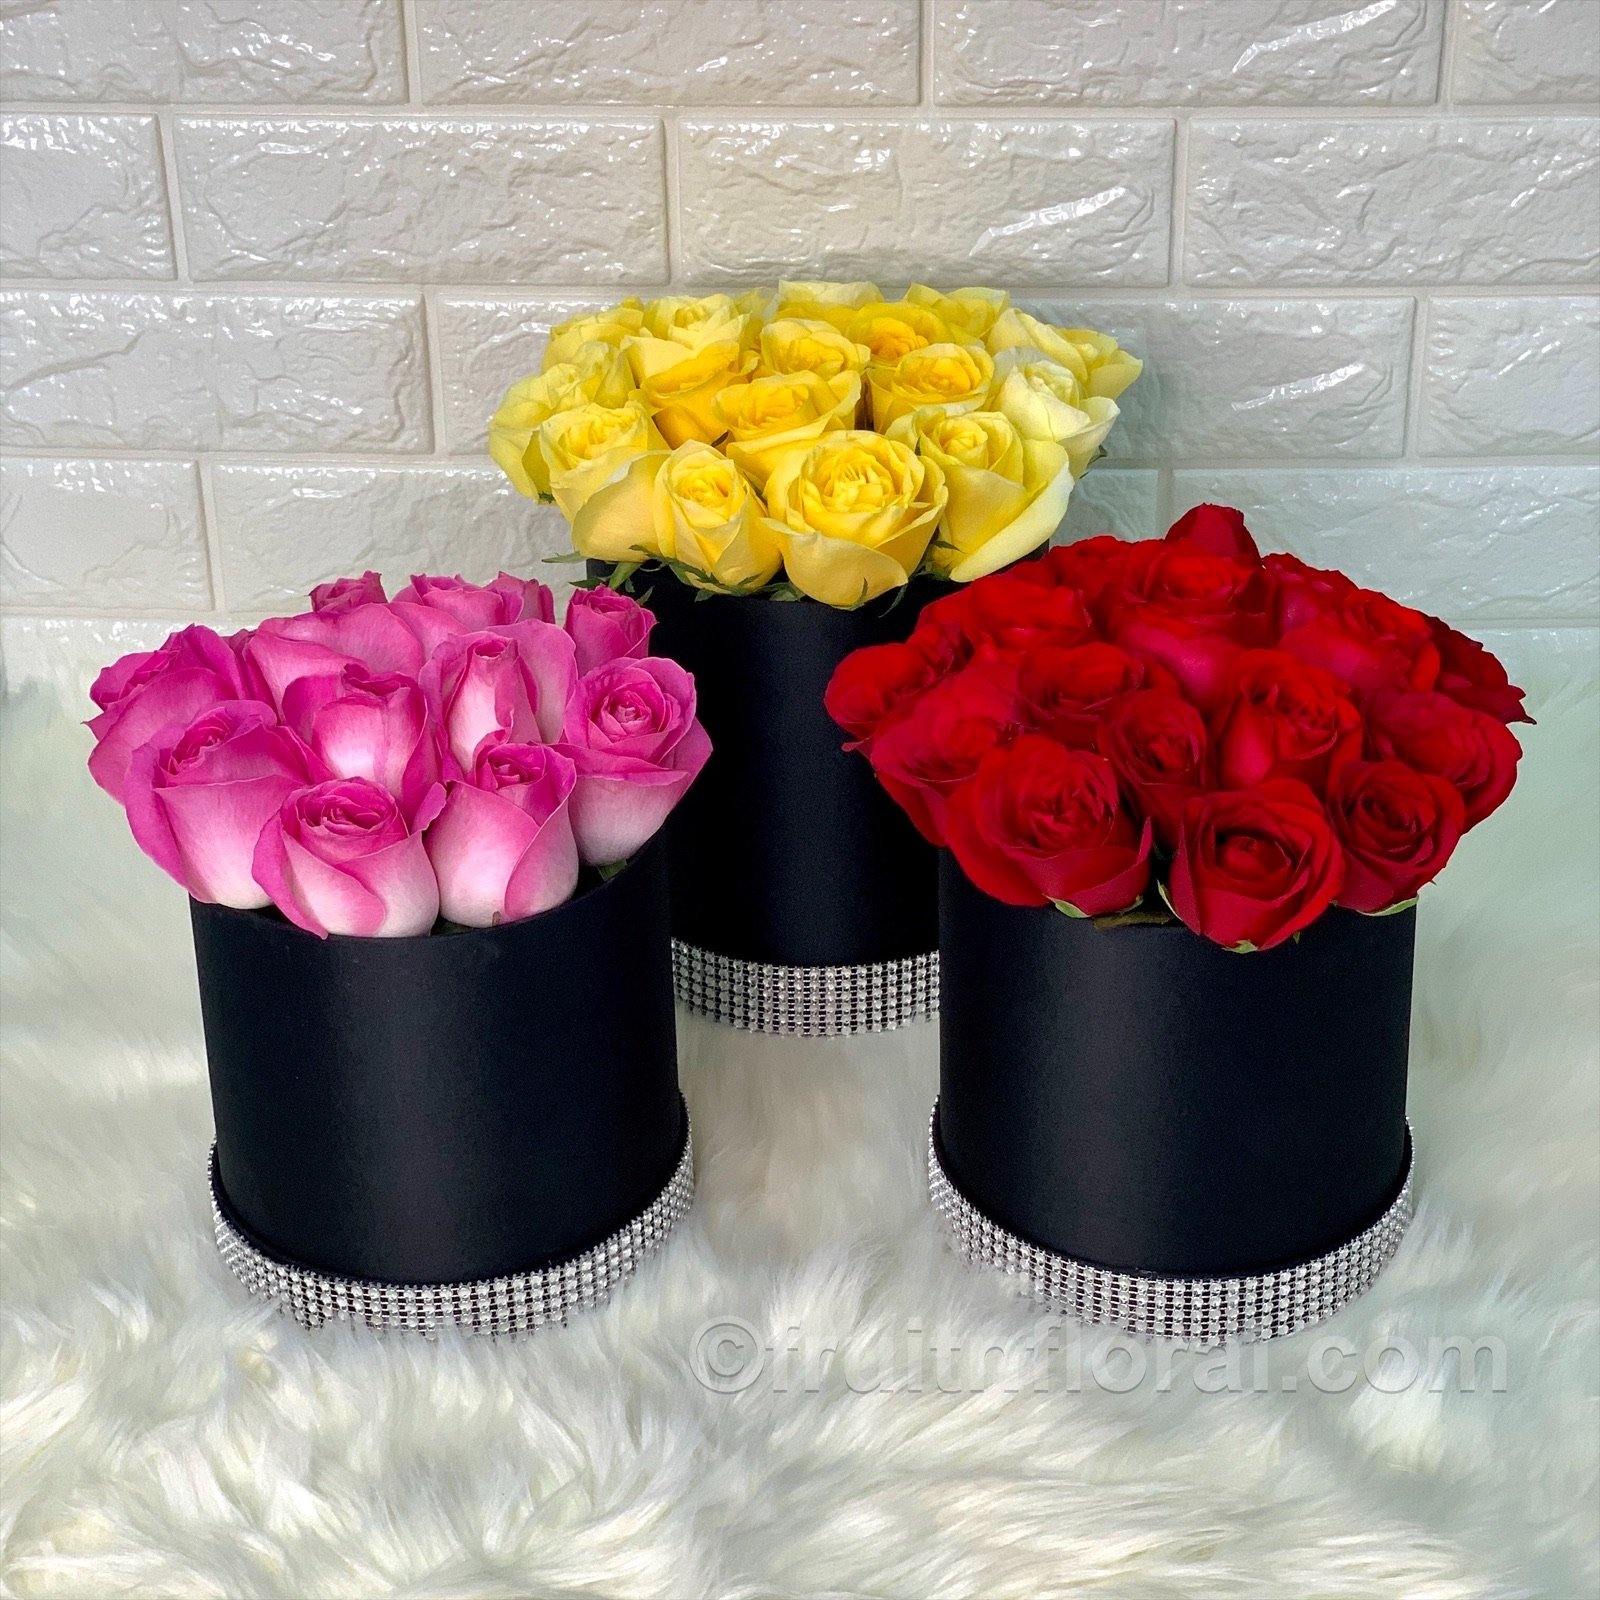 Luxe Yellow Roses - Fruit n Floral